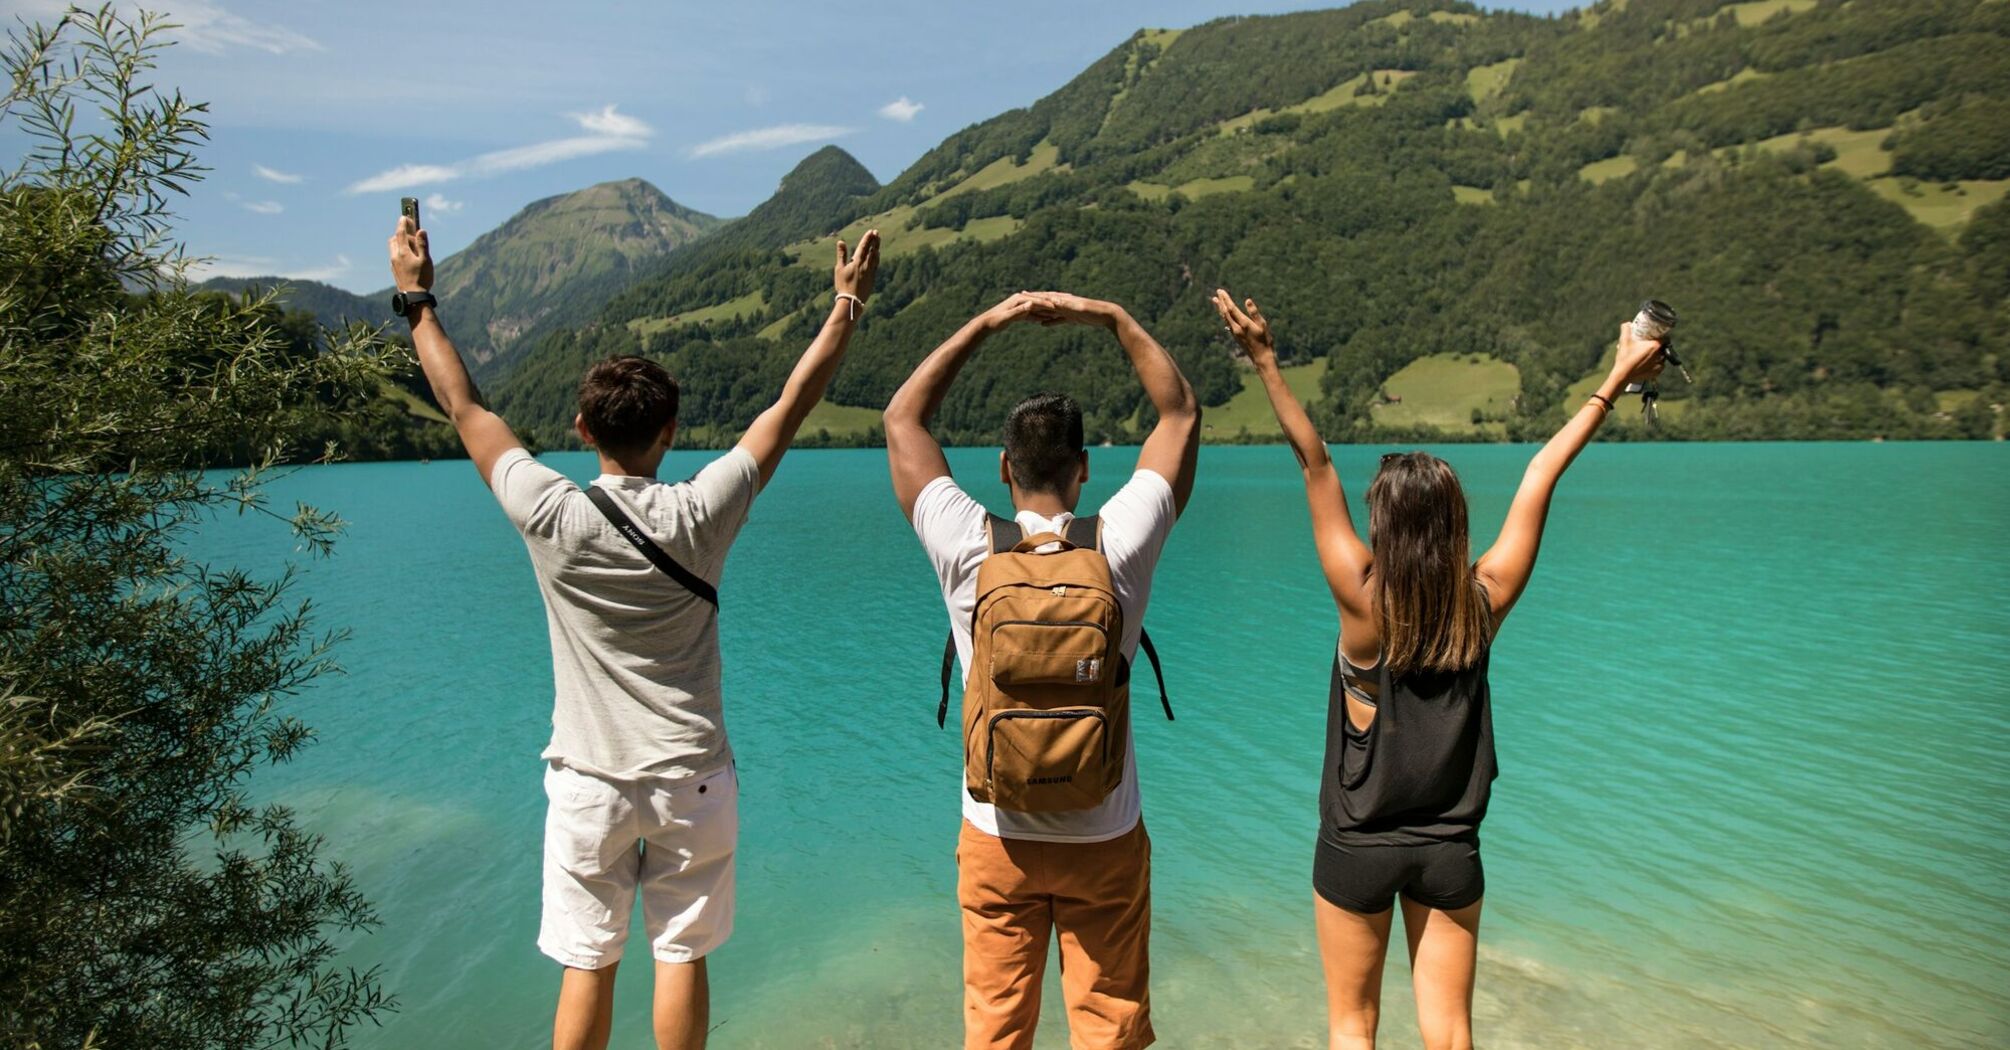 Three friends forming “WoW” with their hands while overlooking a turquoise lake surrounded by lush green hills